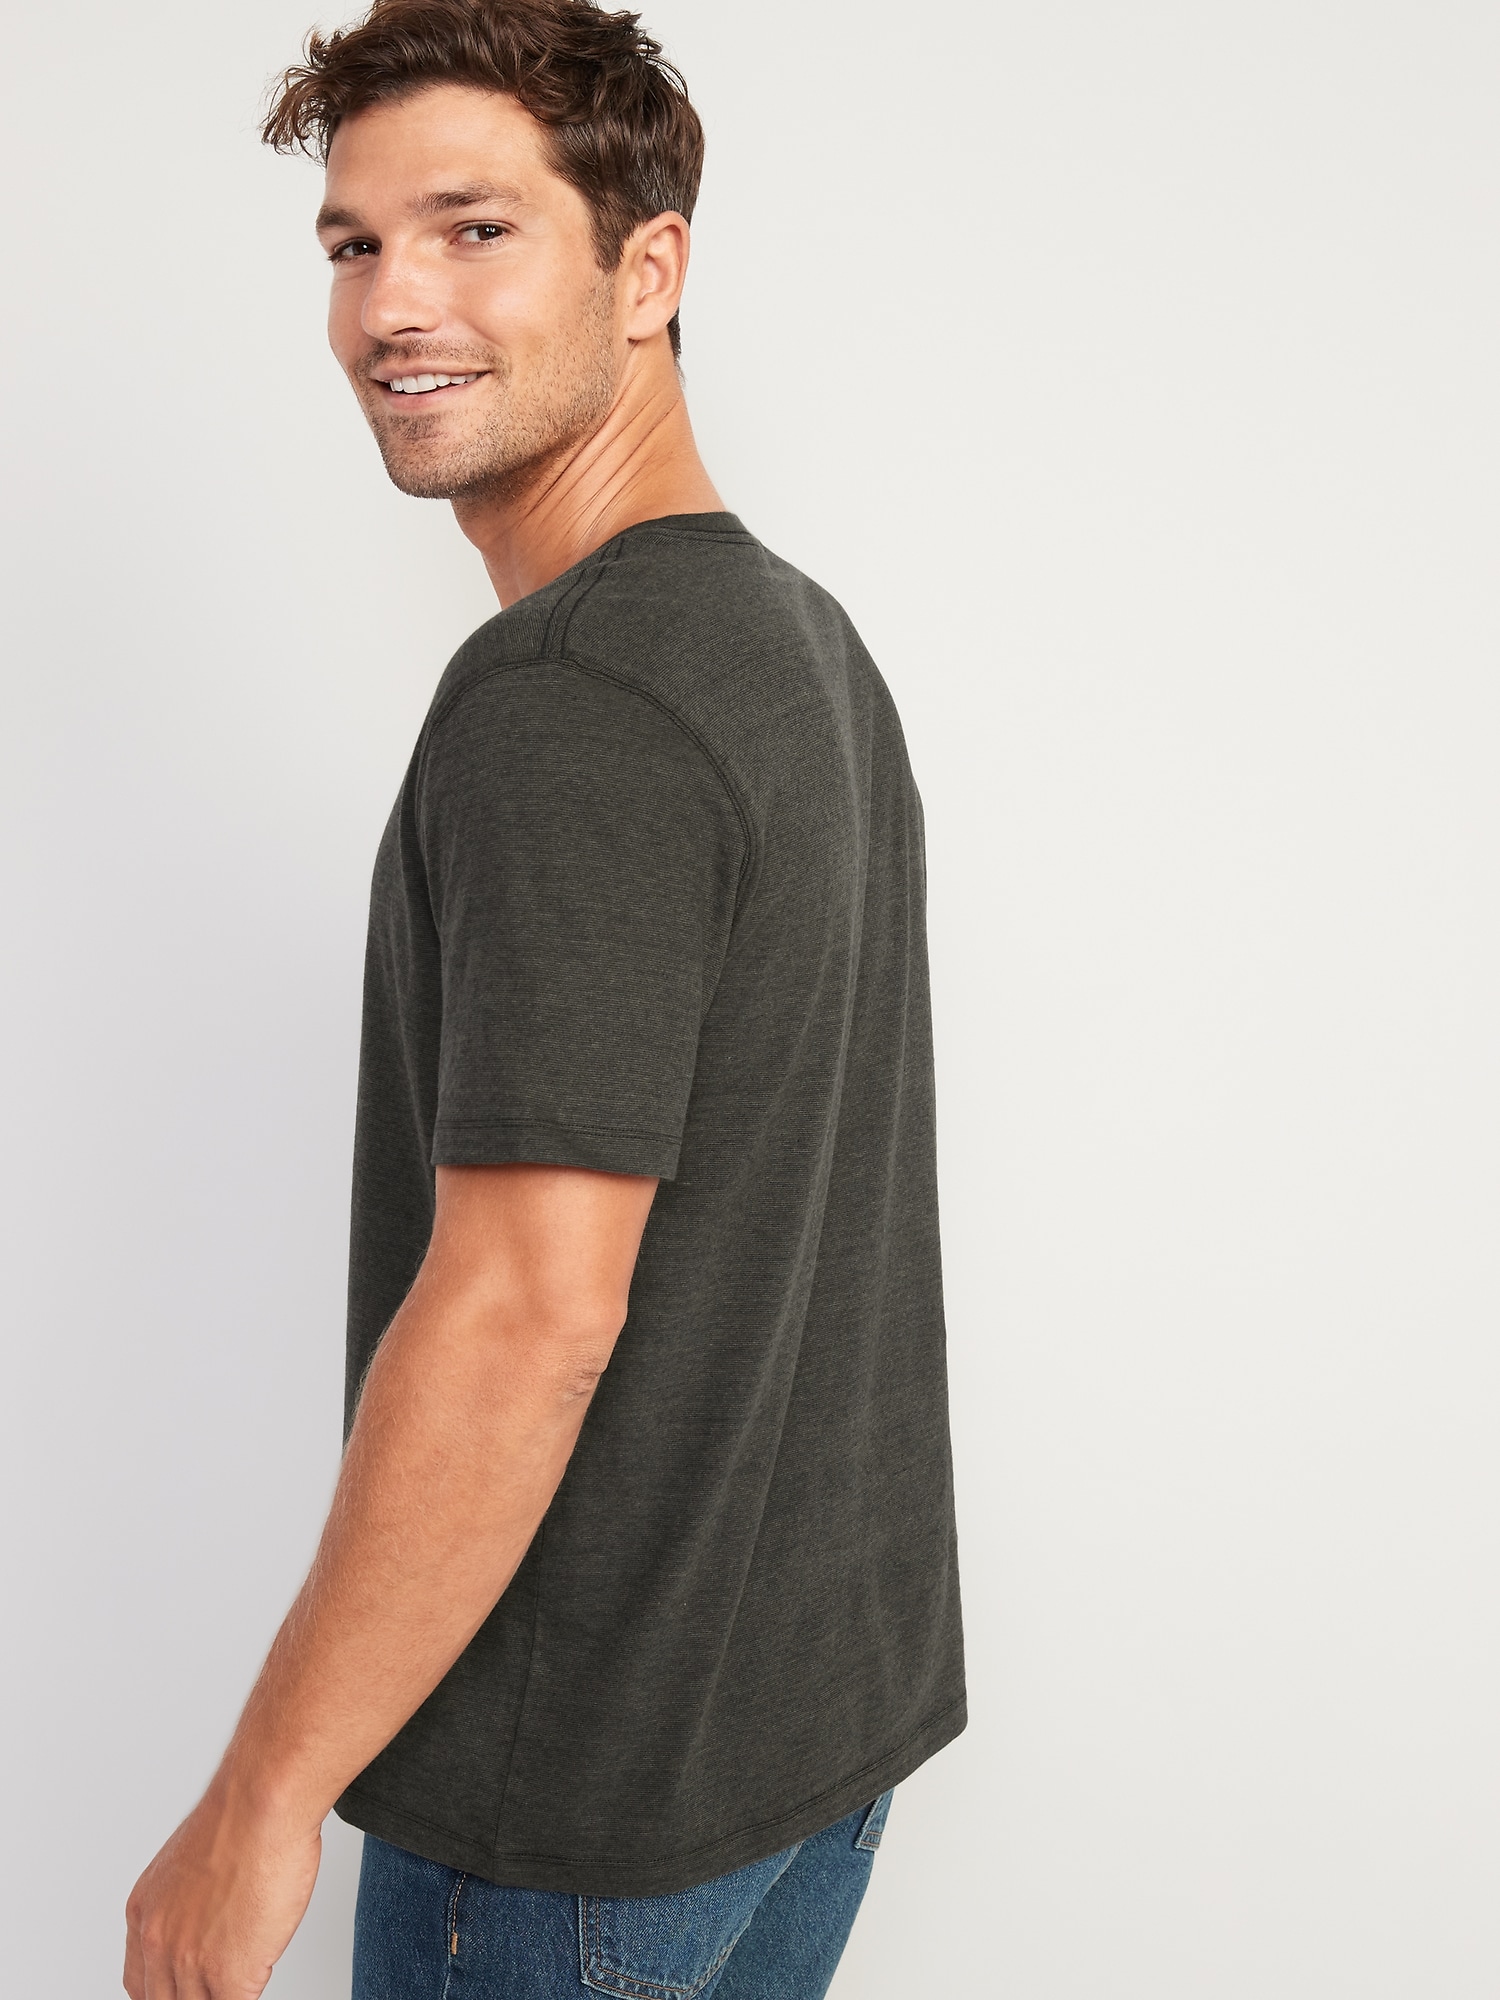 Old Navy T-Shirts for Men